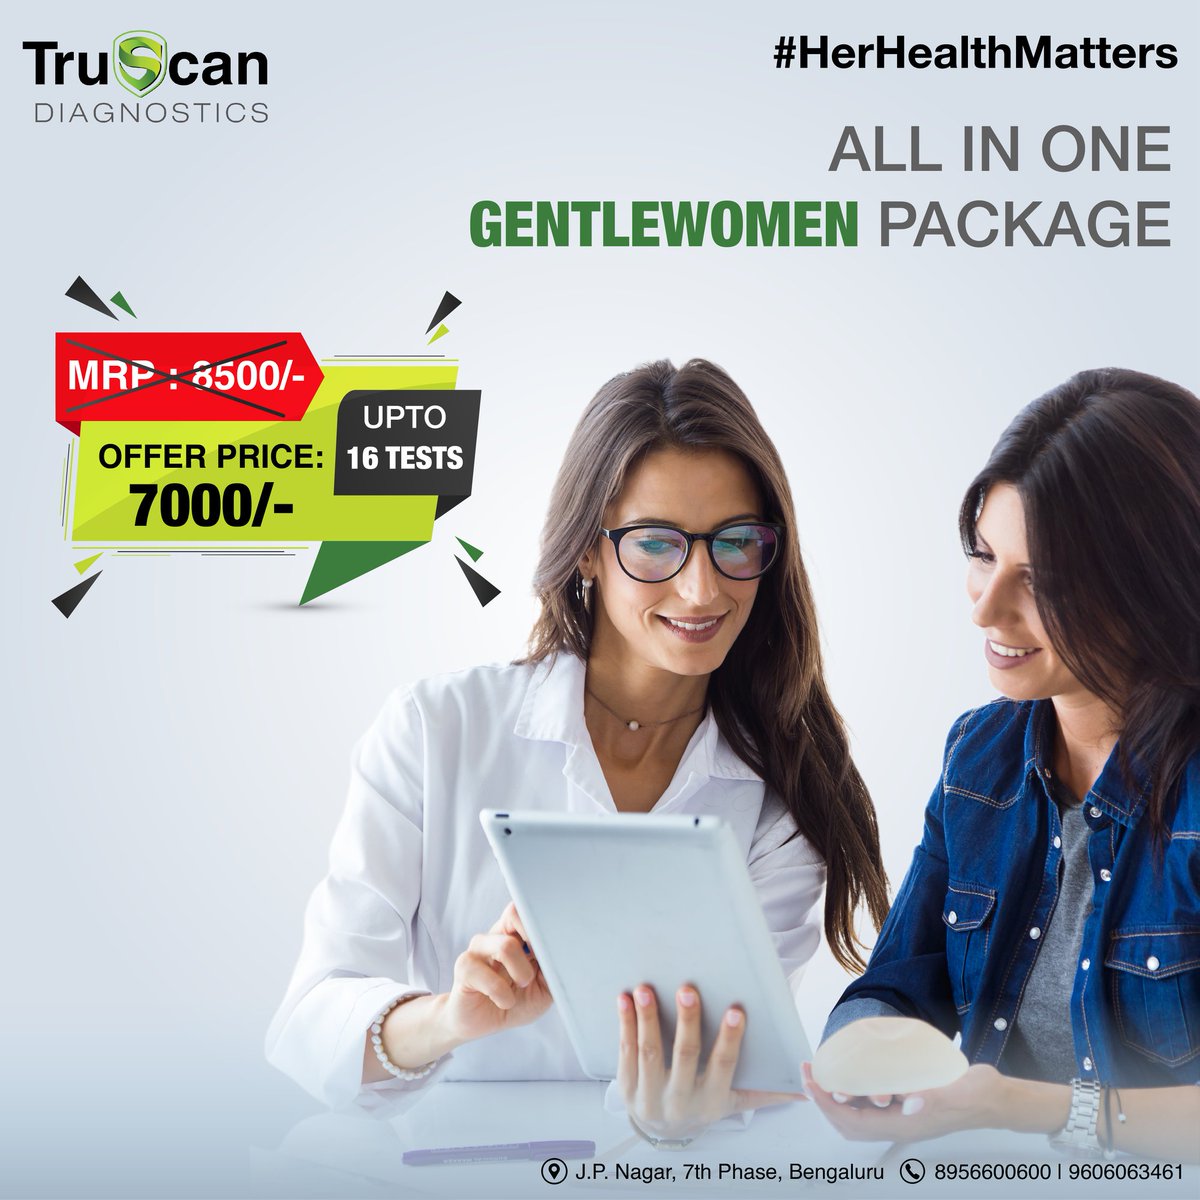 ALL IN ONE GENTLEWOMEN PACKAGE MRP: 8500/-
OFFER PRICE: 7000/-

UPTO 16 TESTS. BOOK AN APPOINTMENT TODAY! 
#herhealthmatters

Book Now: 9606063461 | Visit: truscan.in

#womanhealth #woman #health #womenhealth #health #truscandiagnostics #jpnagar #bangalore